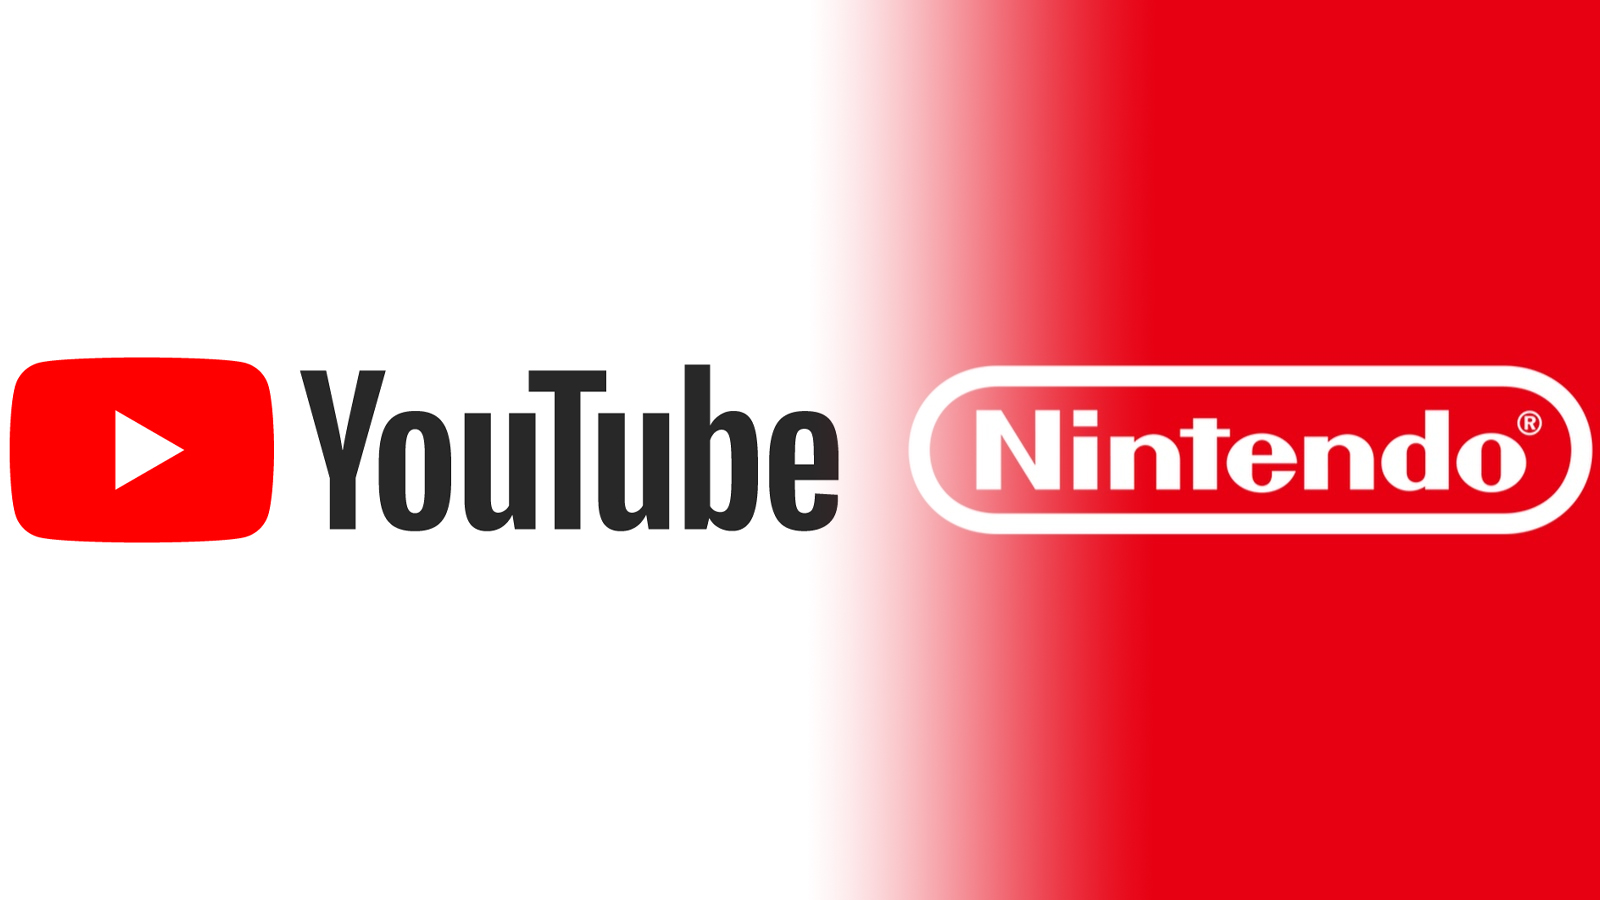 Nintendo youtube. Chinese Driver. But youtube.